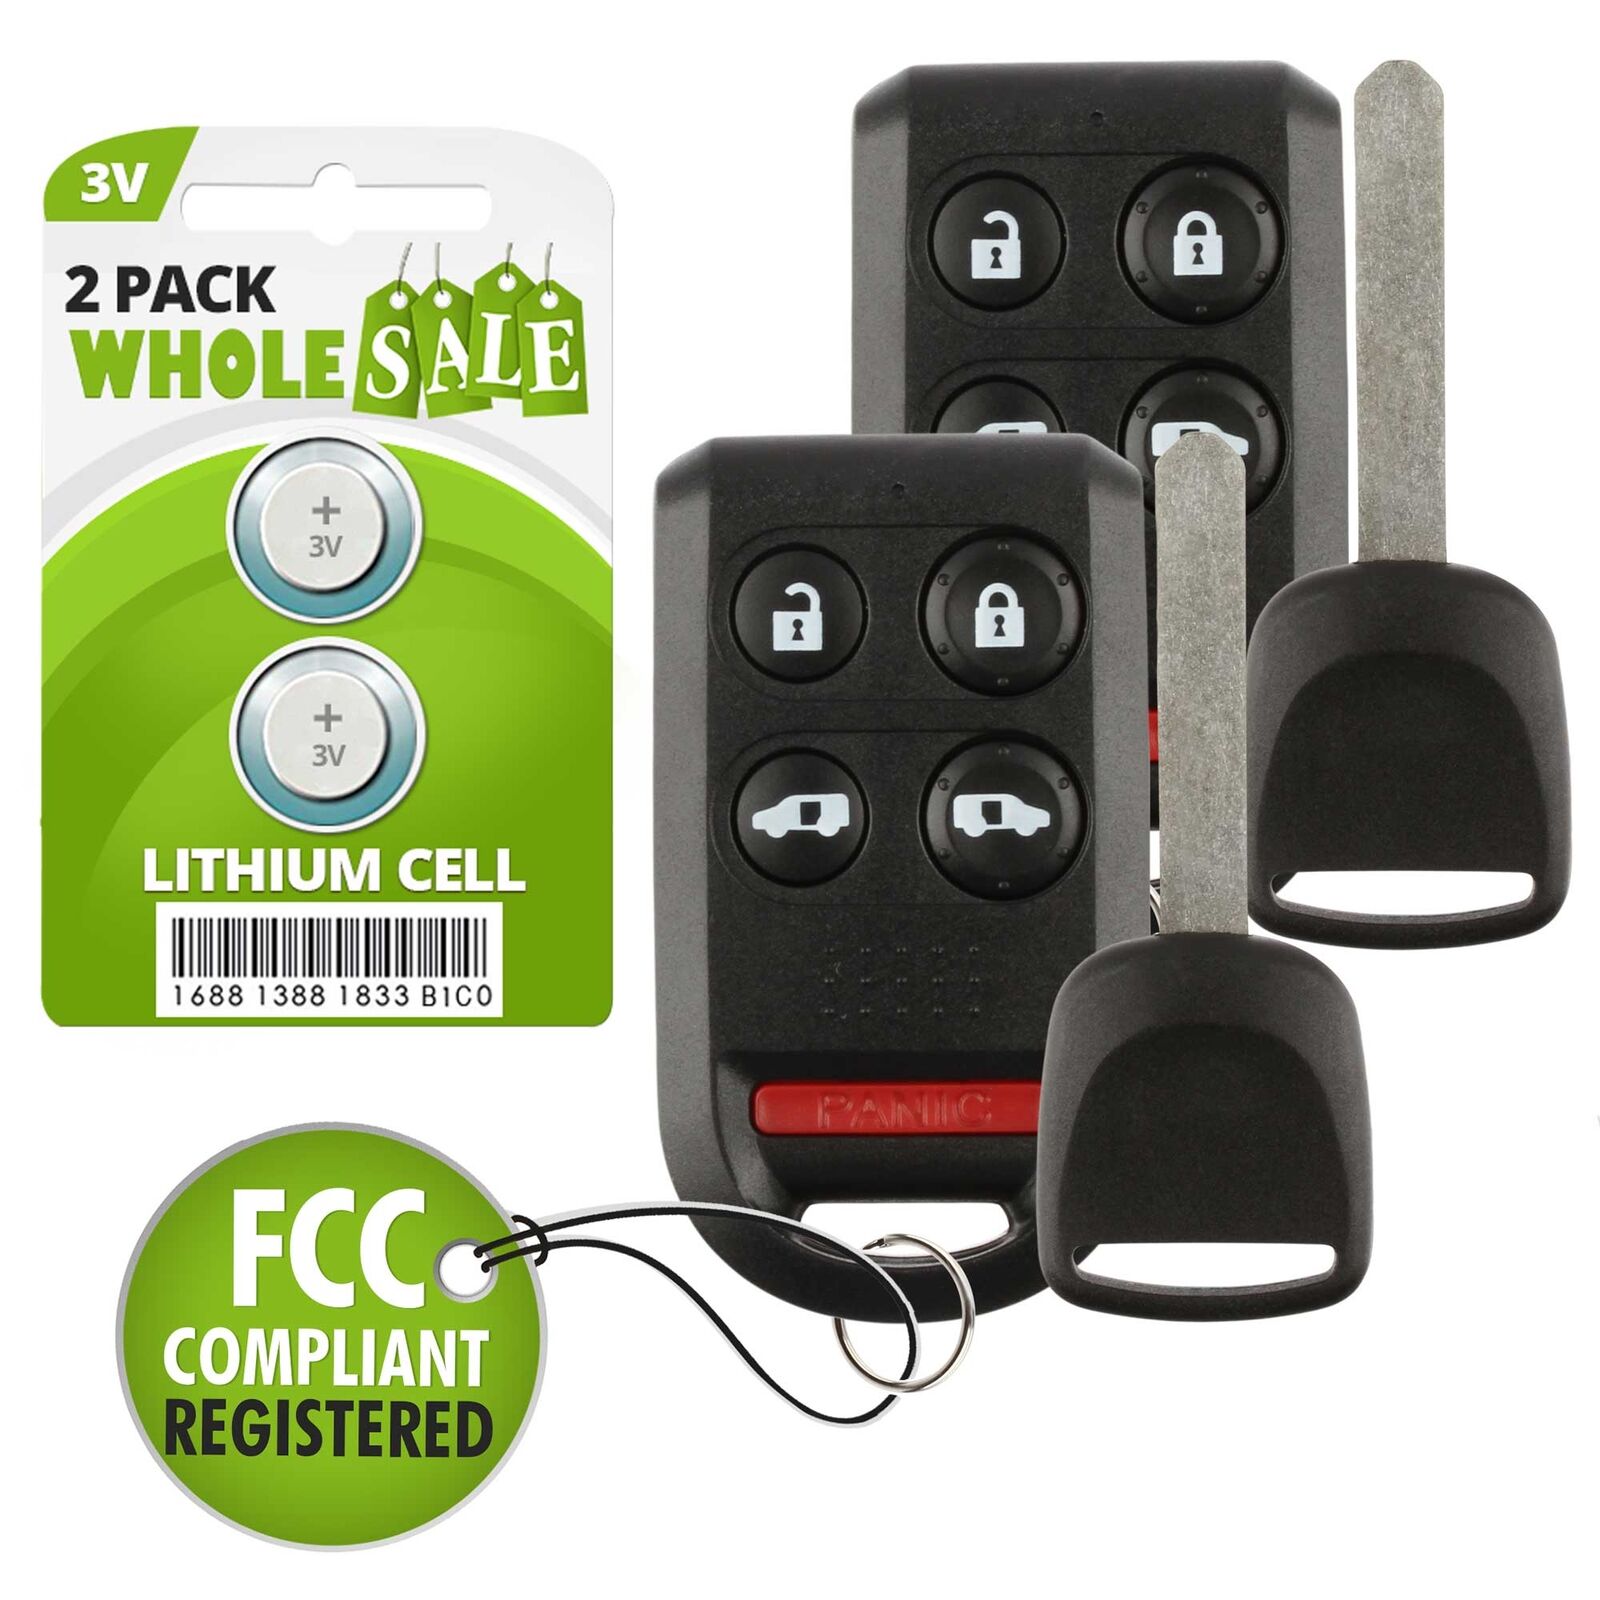 2 Replacement For 2005 2006 2007 2008 2009 2010 Honda Odyssey Key + Fob Remote